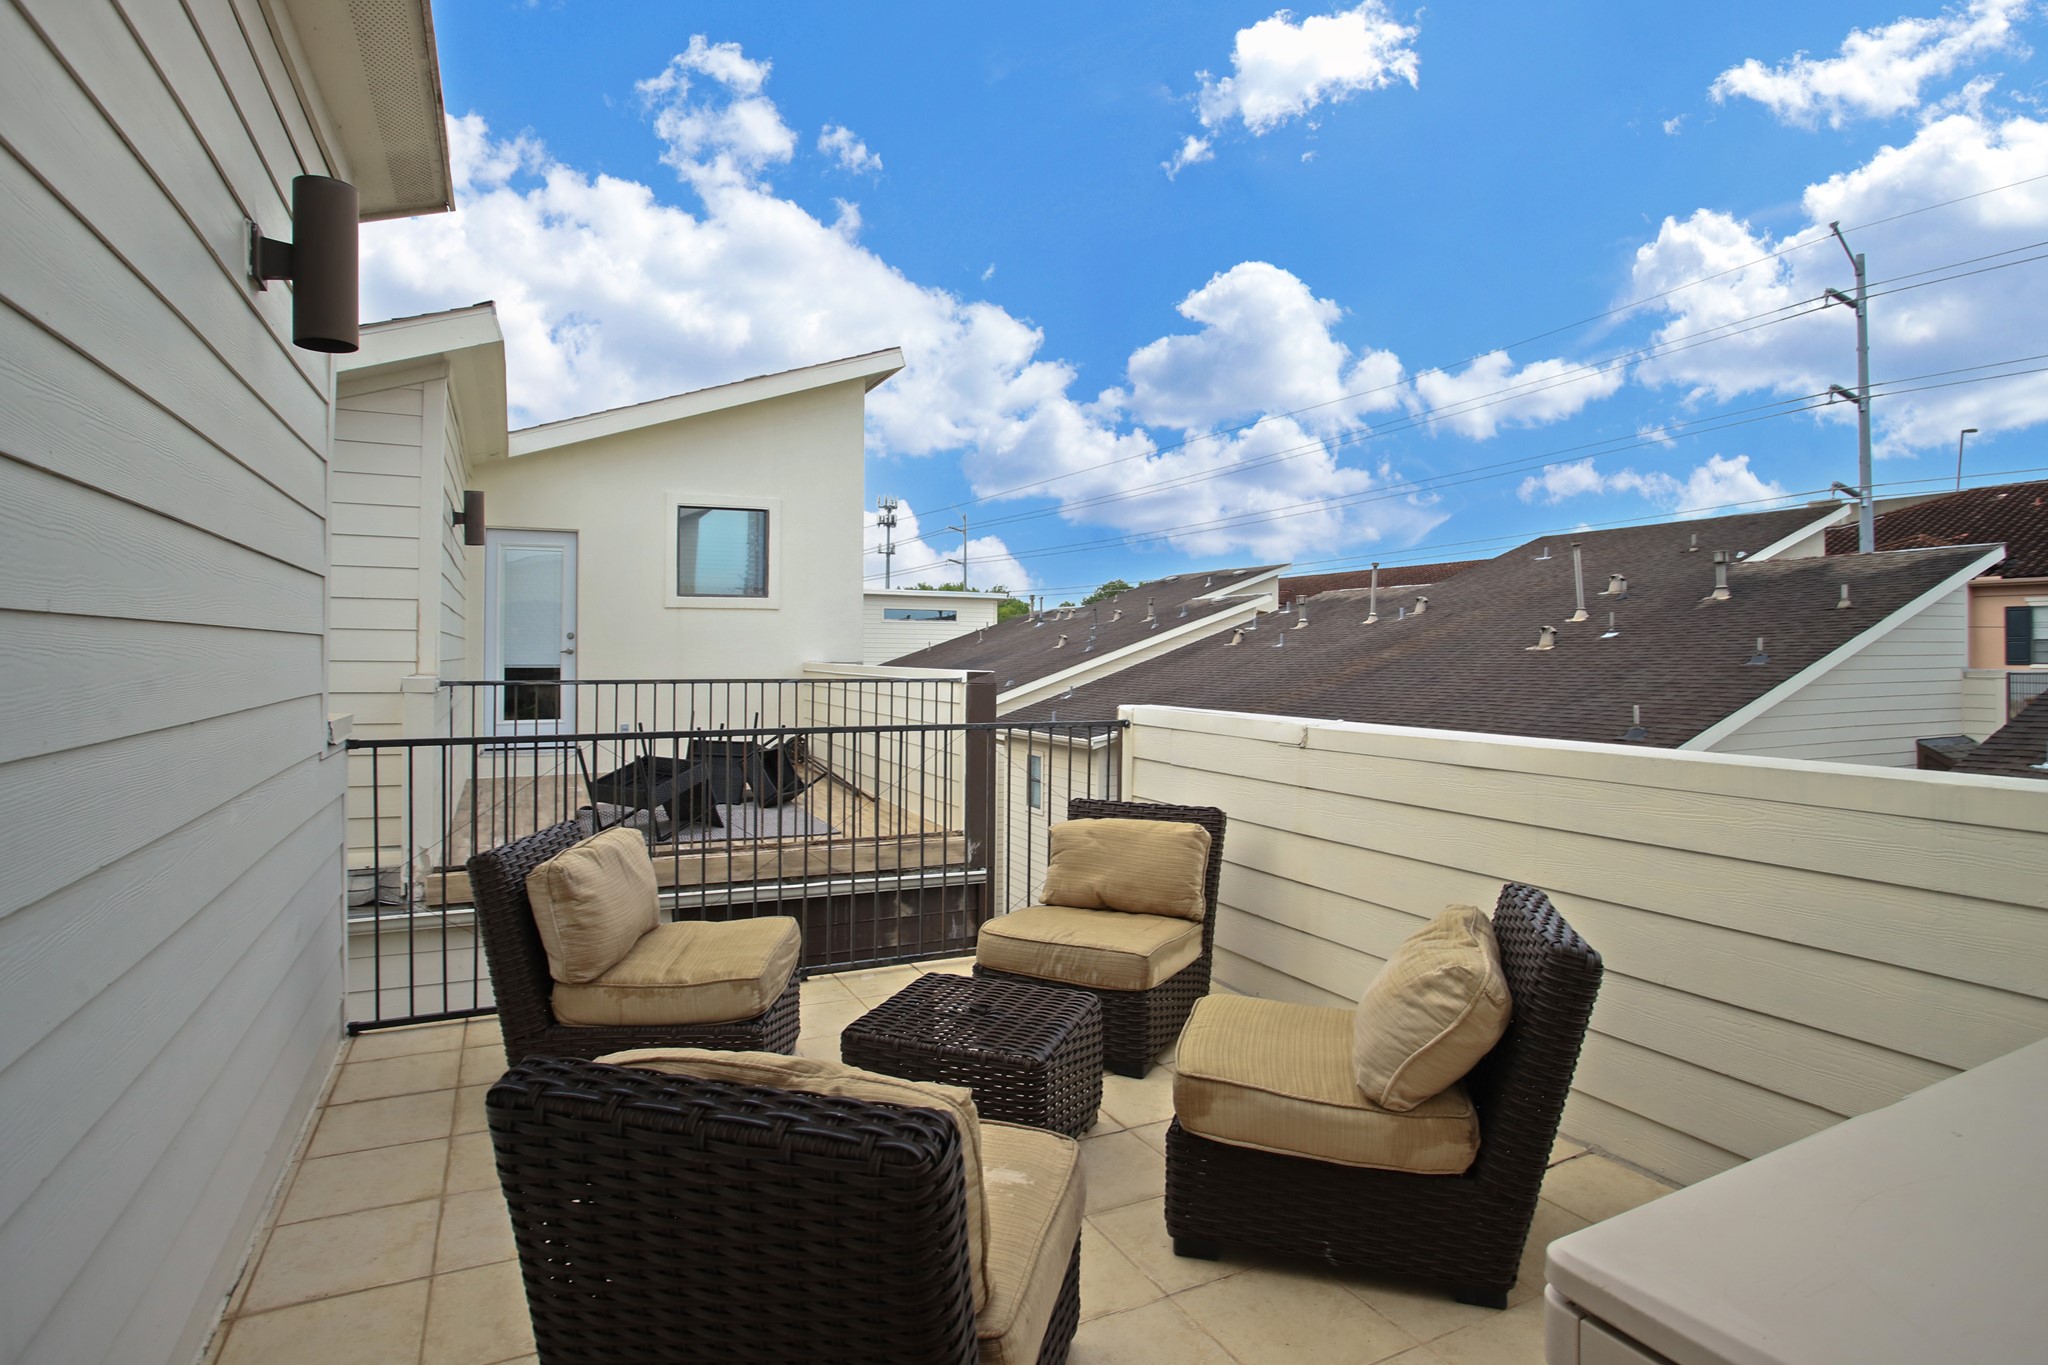 Nice sized rooftop deck to enjoy the great outdoors with friends.